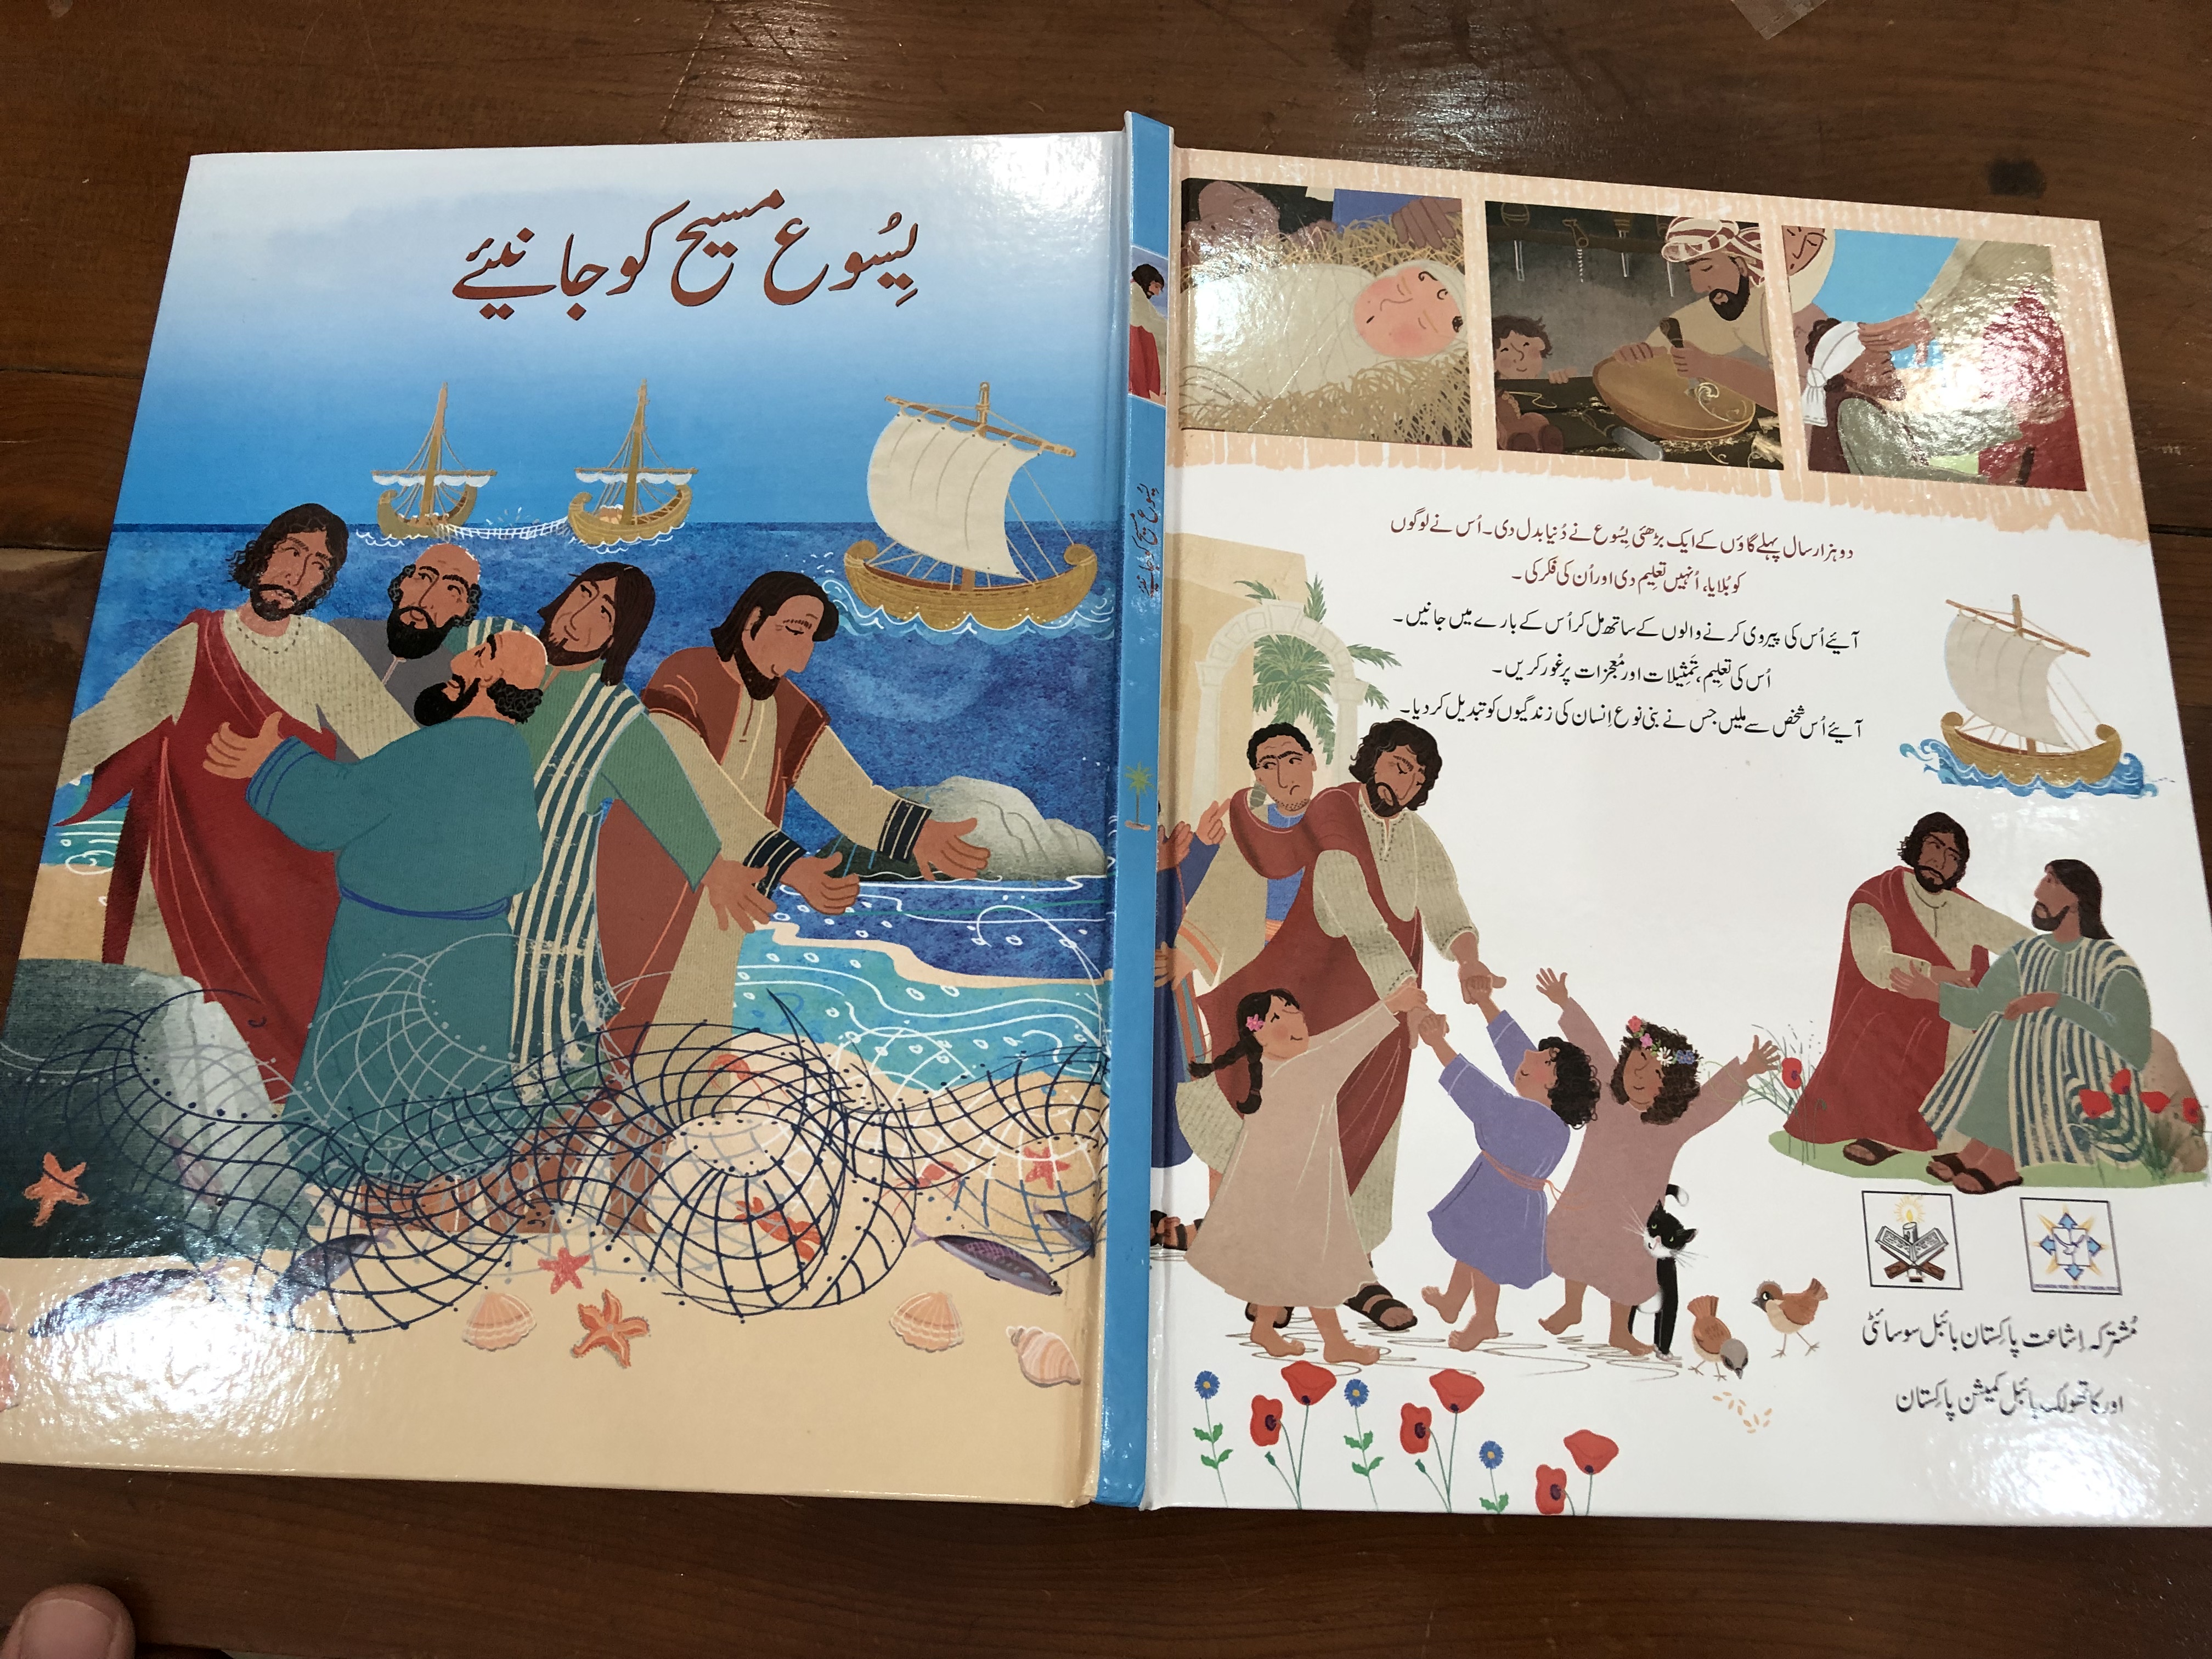 who-is-jesus-by-christina-goodings-urdu-edition-illustrated-by-maria-royse-pakistan-bible-society-catholic-bible-commission-first-edition-2017-15-.jpg